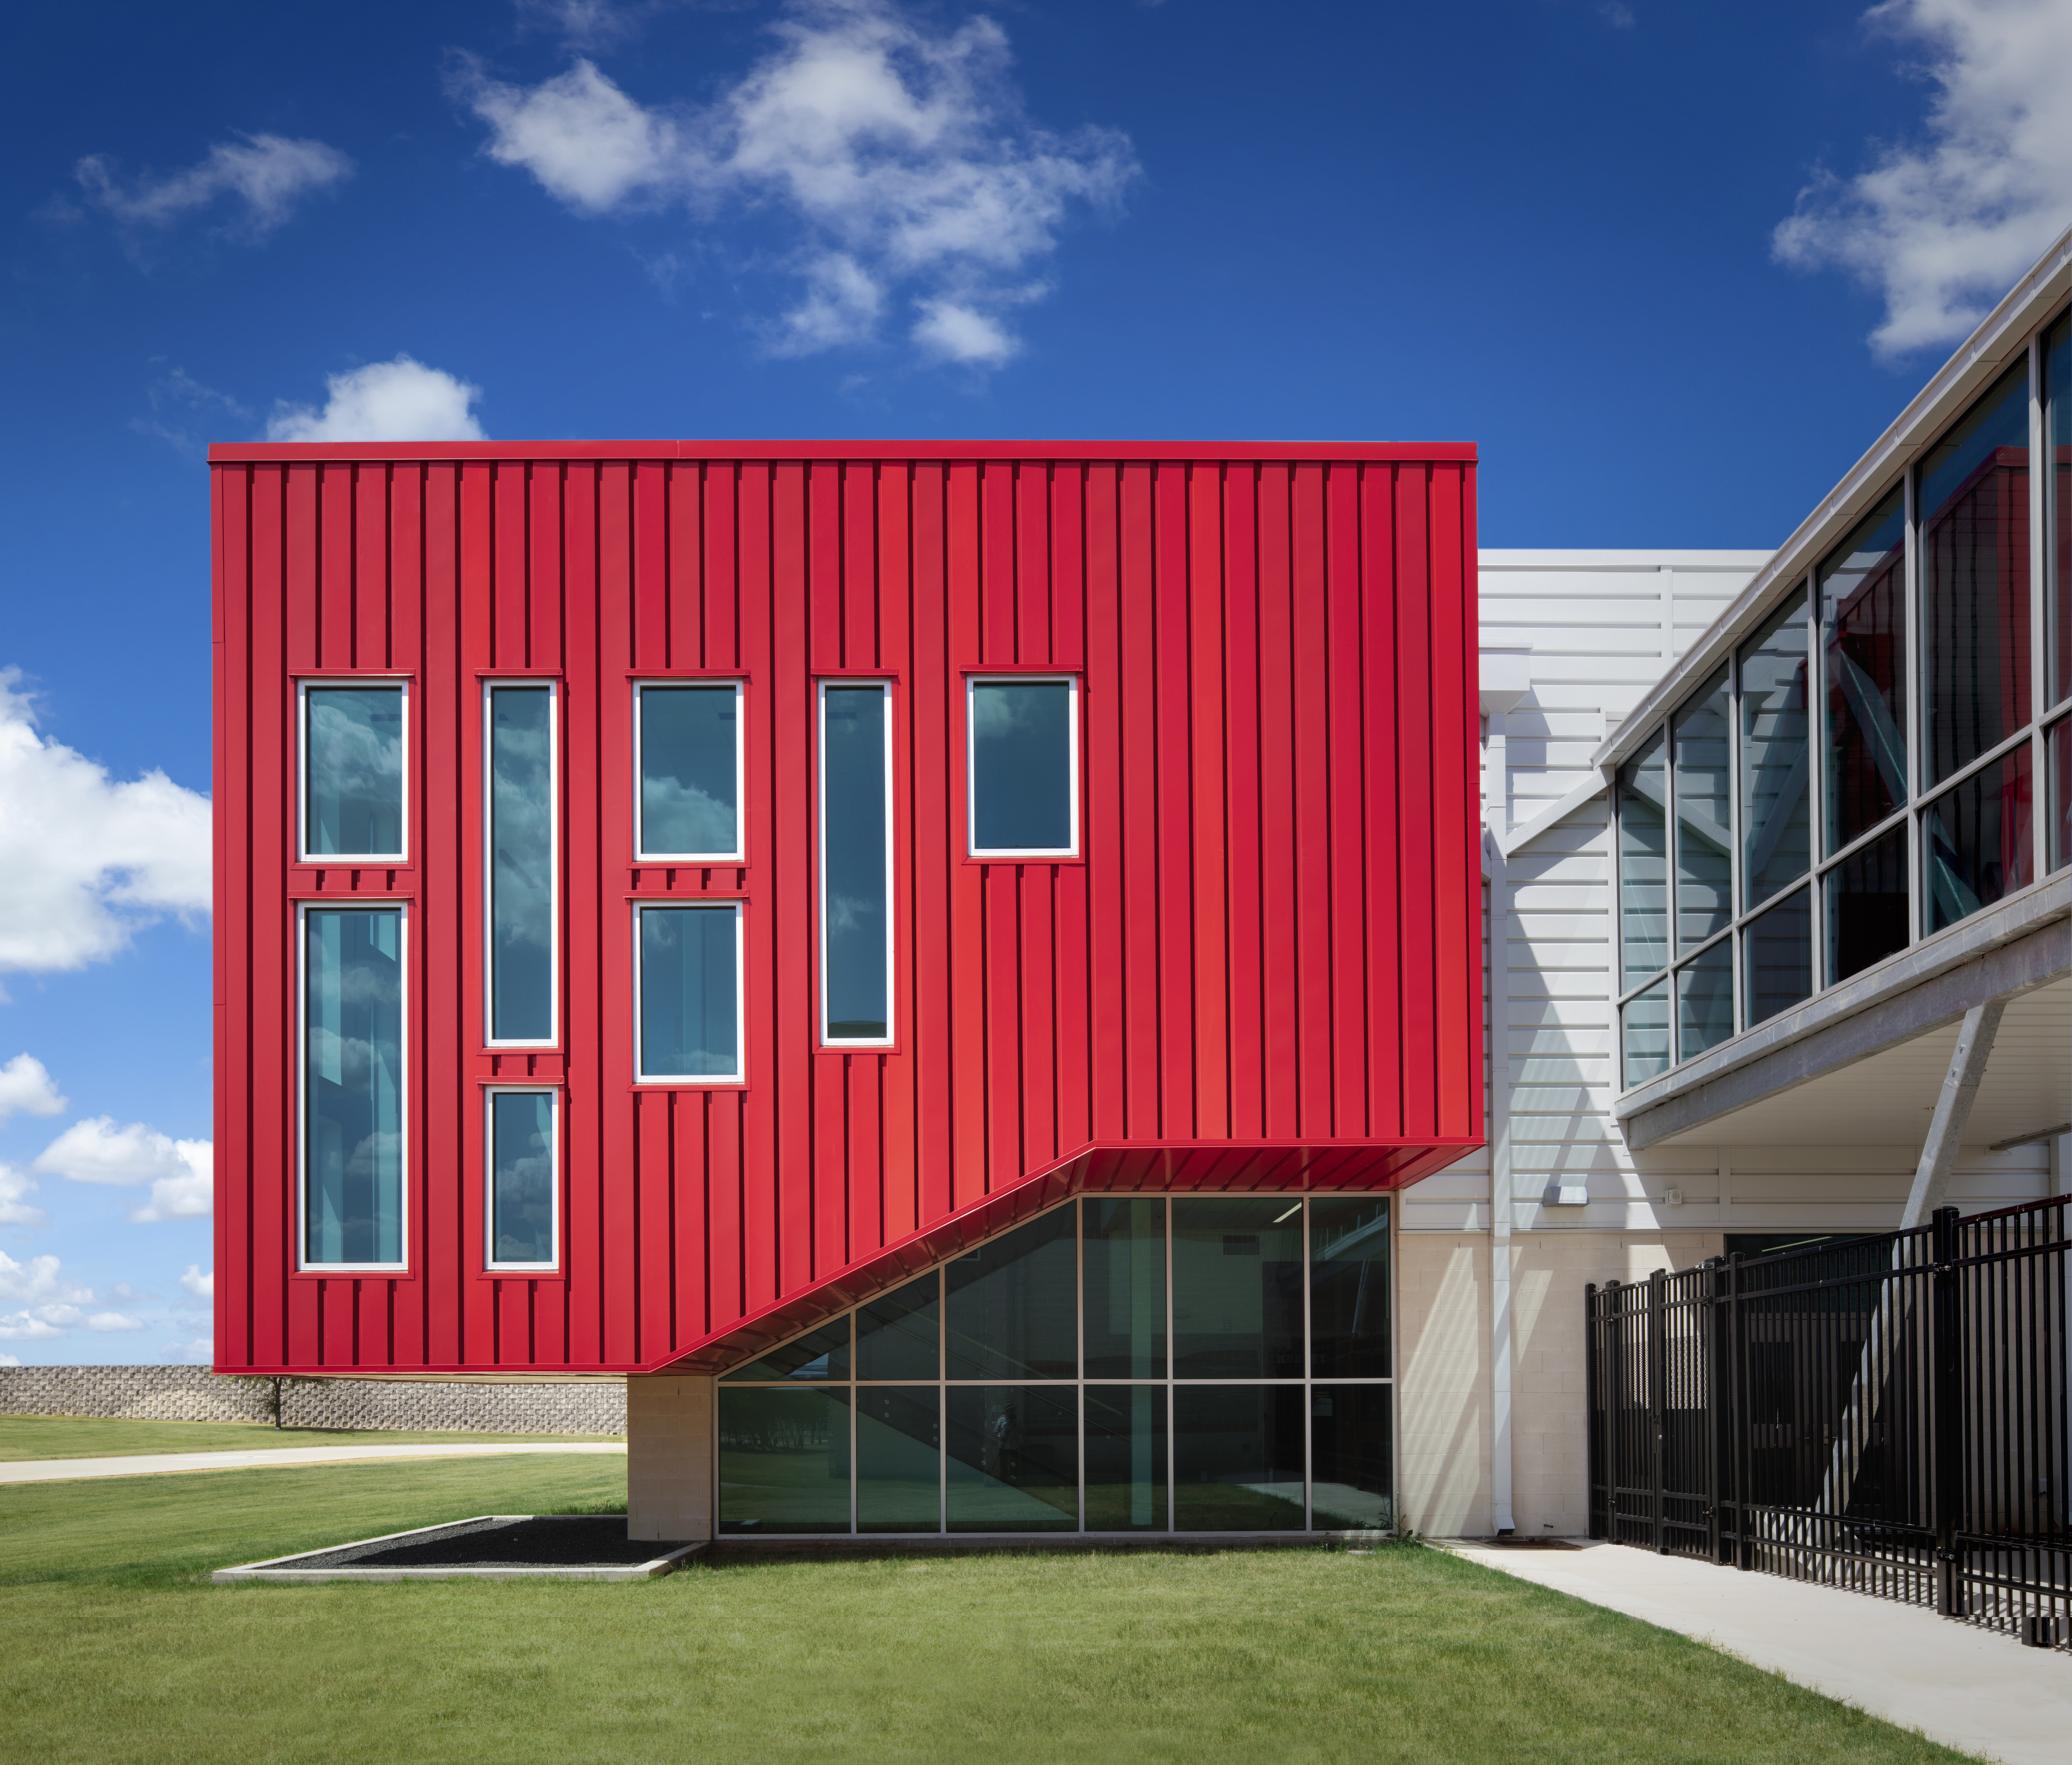 Tite-Loc Plus Metal Roofing Highline S-1 Metal Wall Panels Del Valle HS